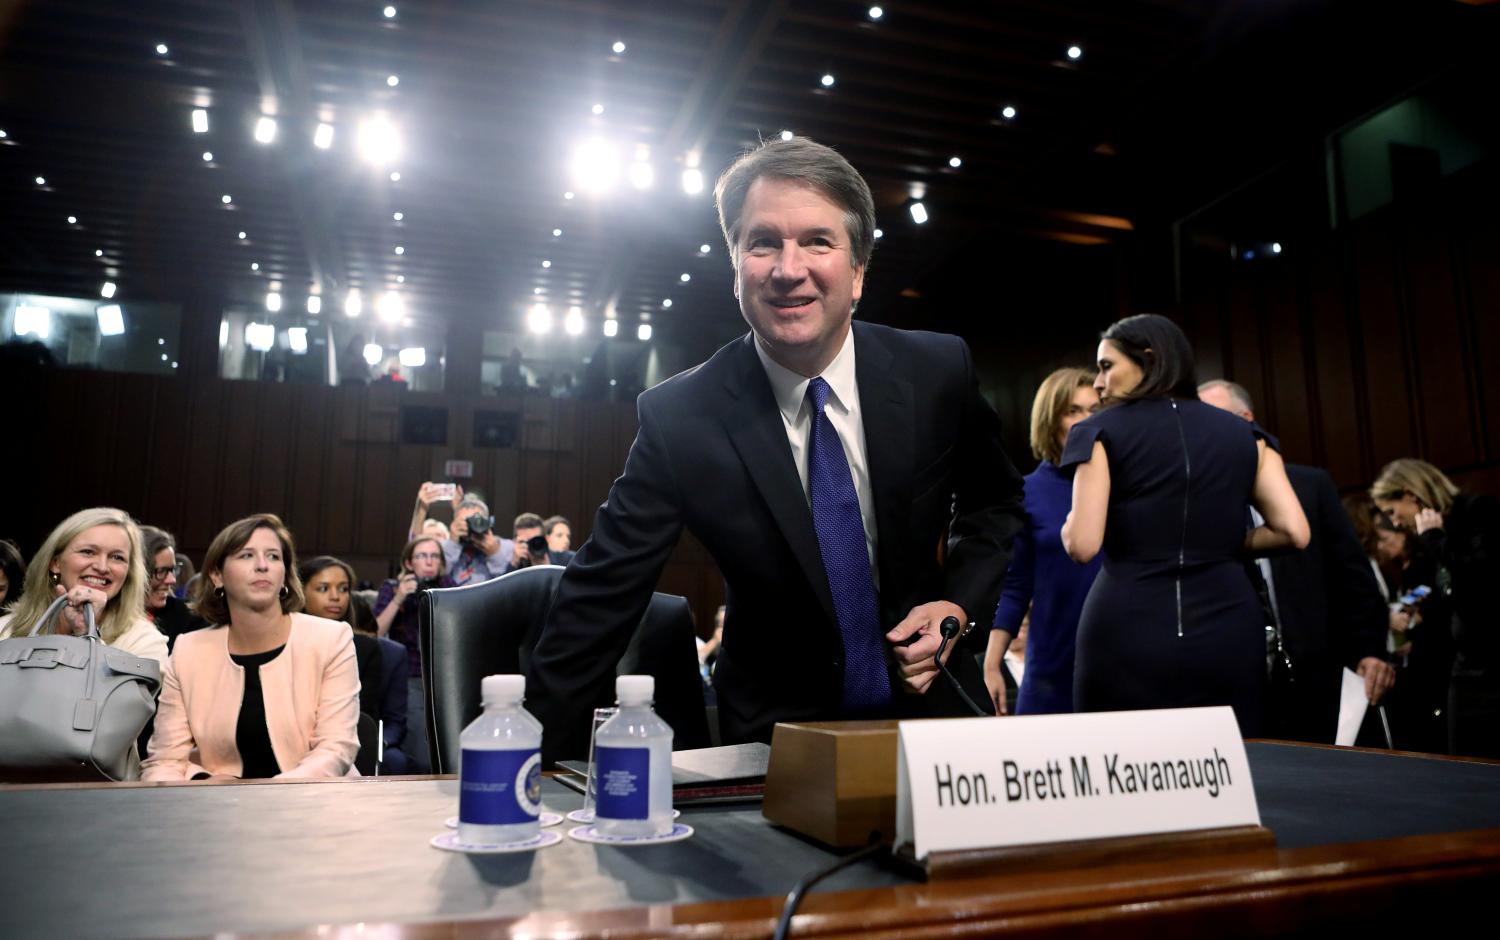 U.S. Supreme Court nominee judge Brett Kavanaugh takes his seat as his Senate Judiciary Committee confirmation hearing continues on Capitol Hill in Washington.